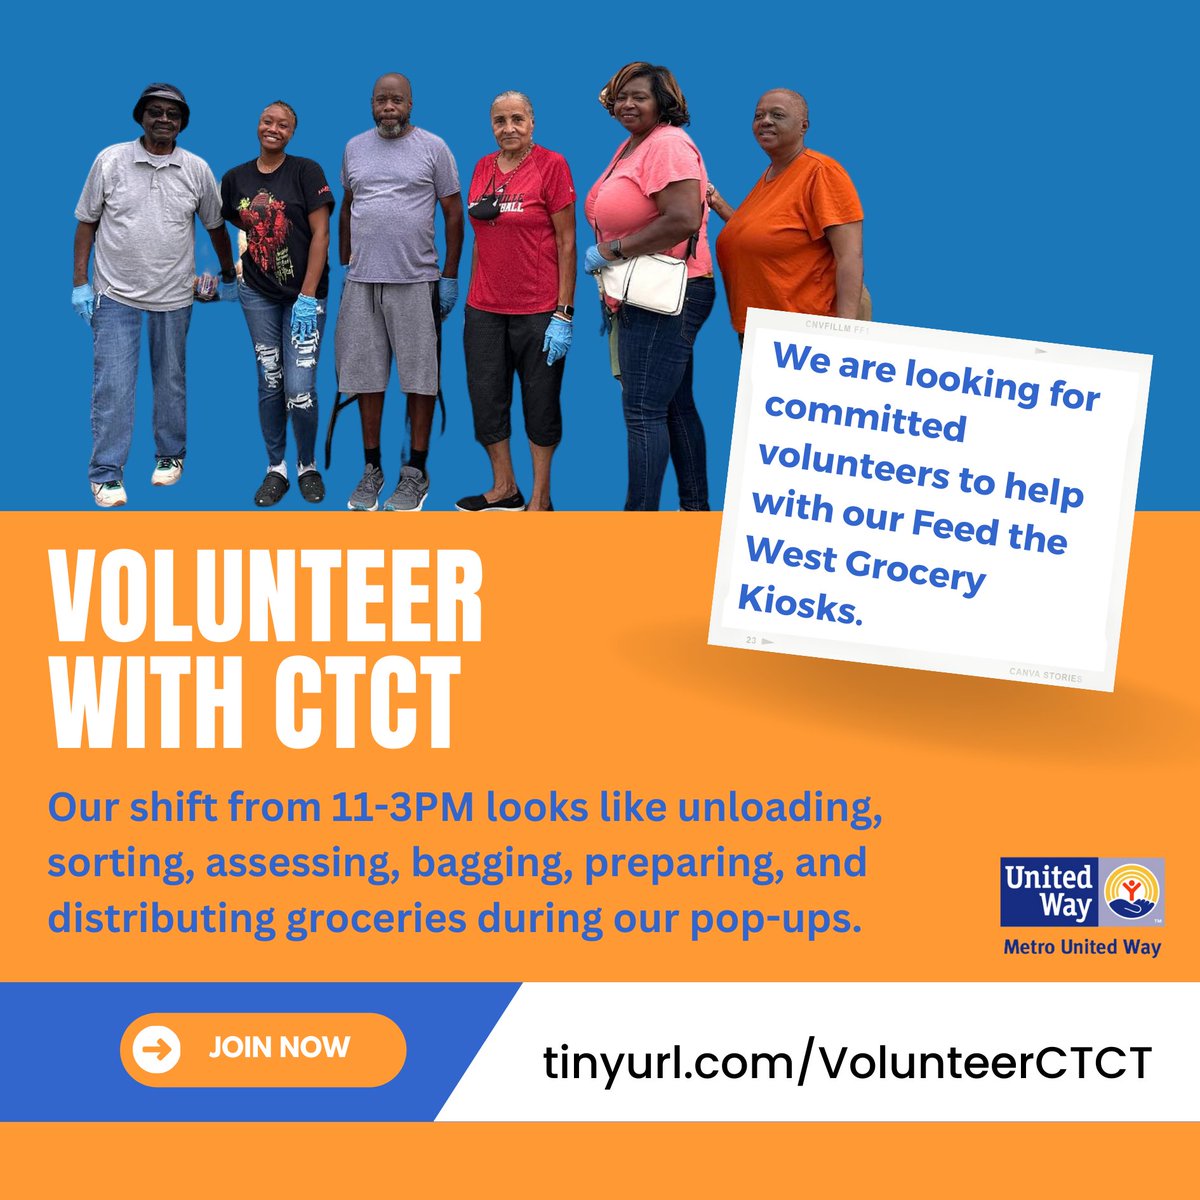 We are looking for committed volunteers to help with our Feed the West Grocery Kiosks Mon - Thurs! Our shift from 11-3PM looks like unloading, sorting, bagging, and distributing groceries during our pop-ups. Visit tinyurl.com/VolunteerCTCT to sign up!